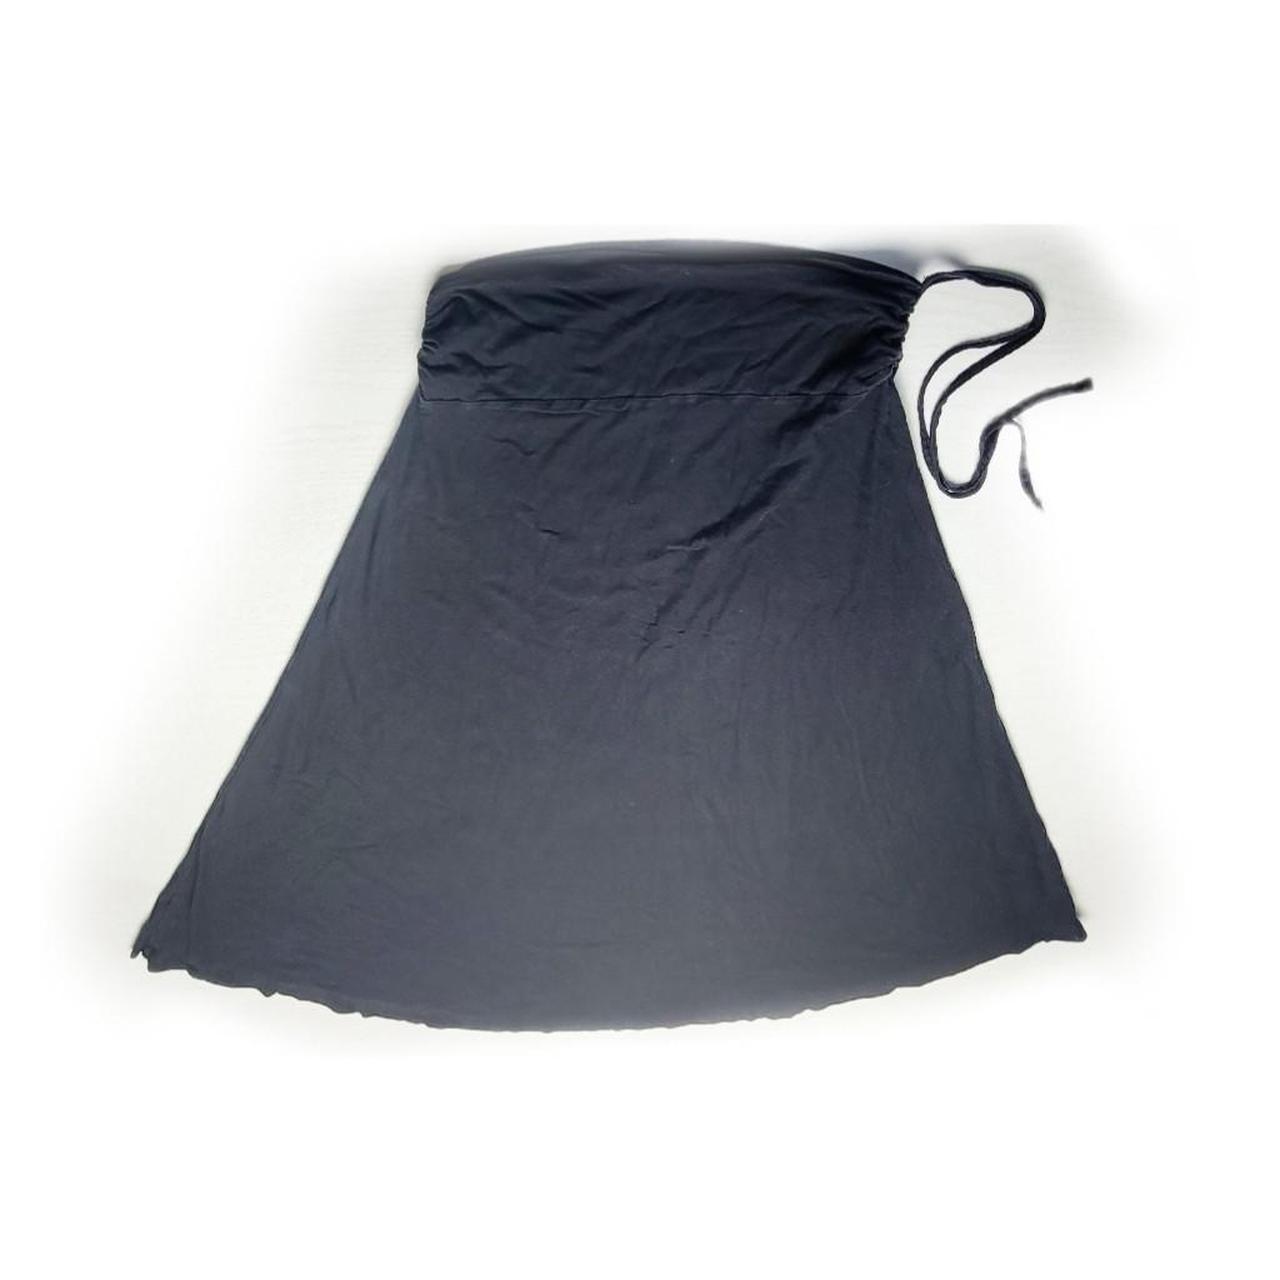 Product Image 2 - Black Skirt

Comfortable and stretchy, the